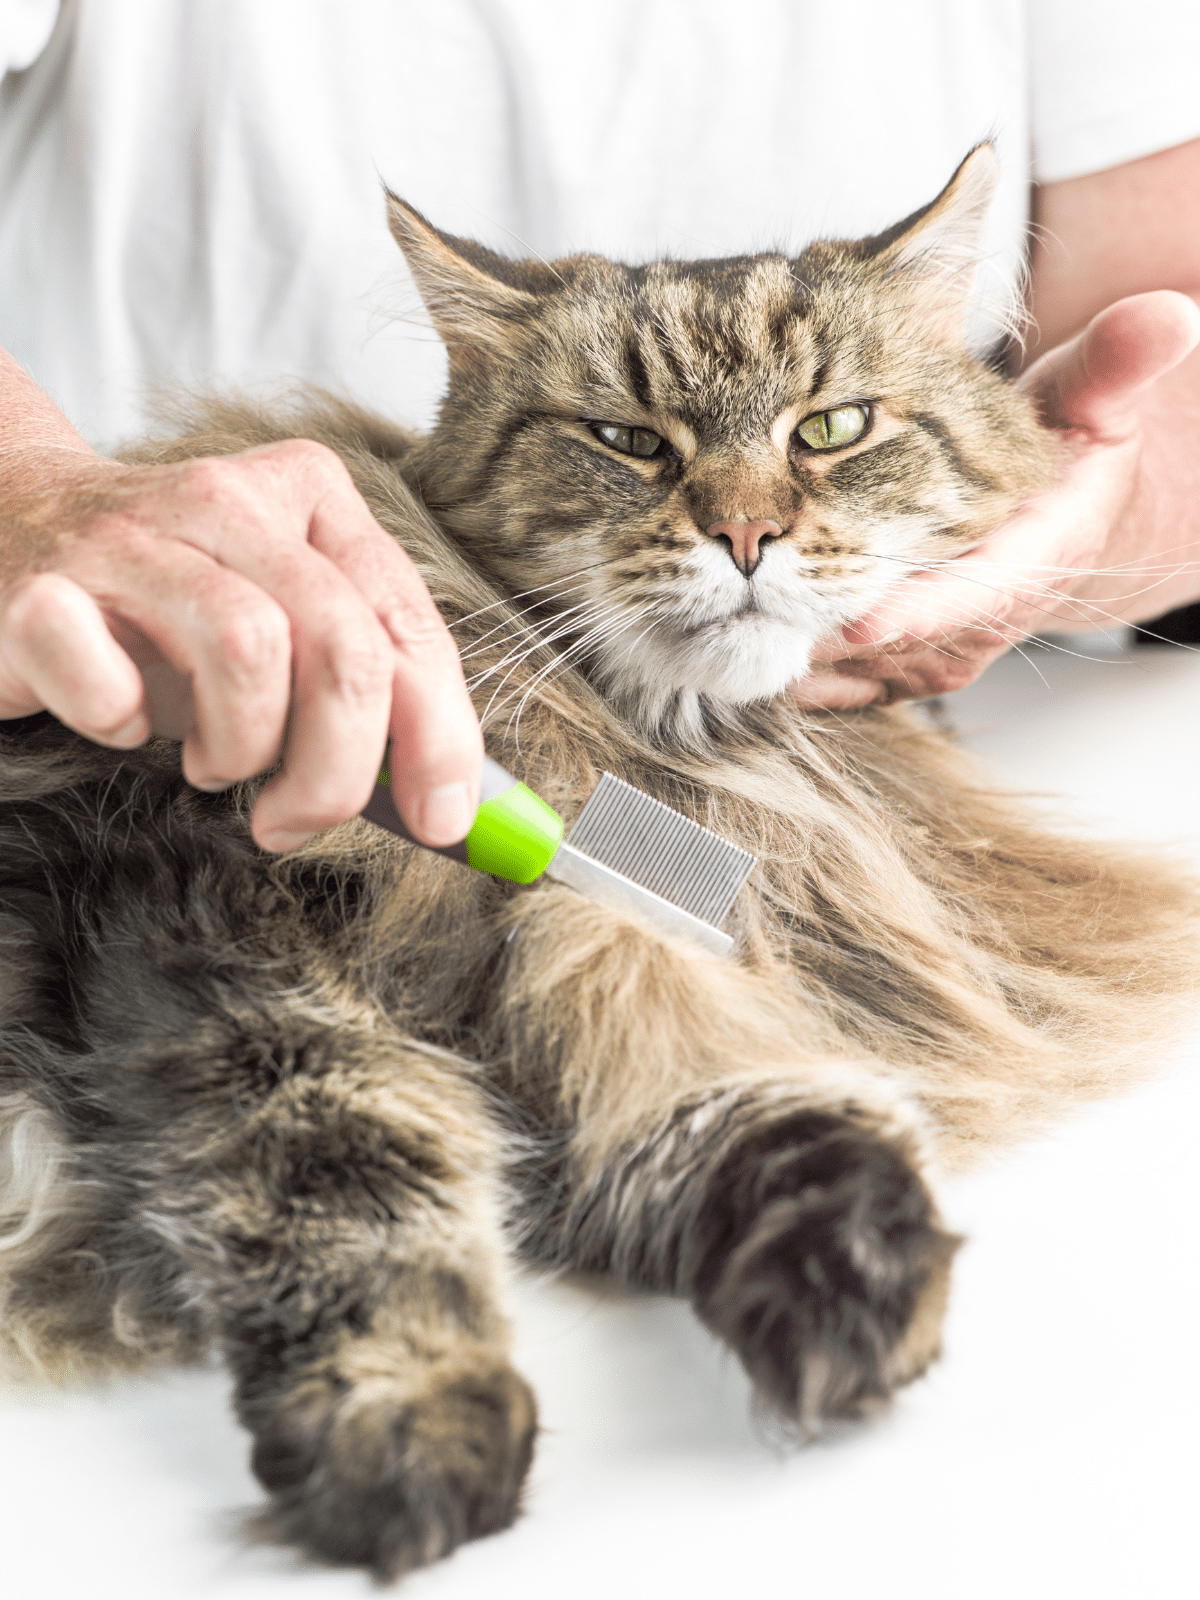 a person holding a brush and a cat.